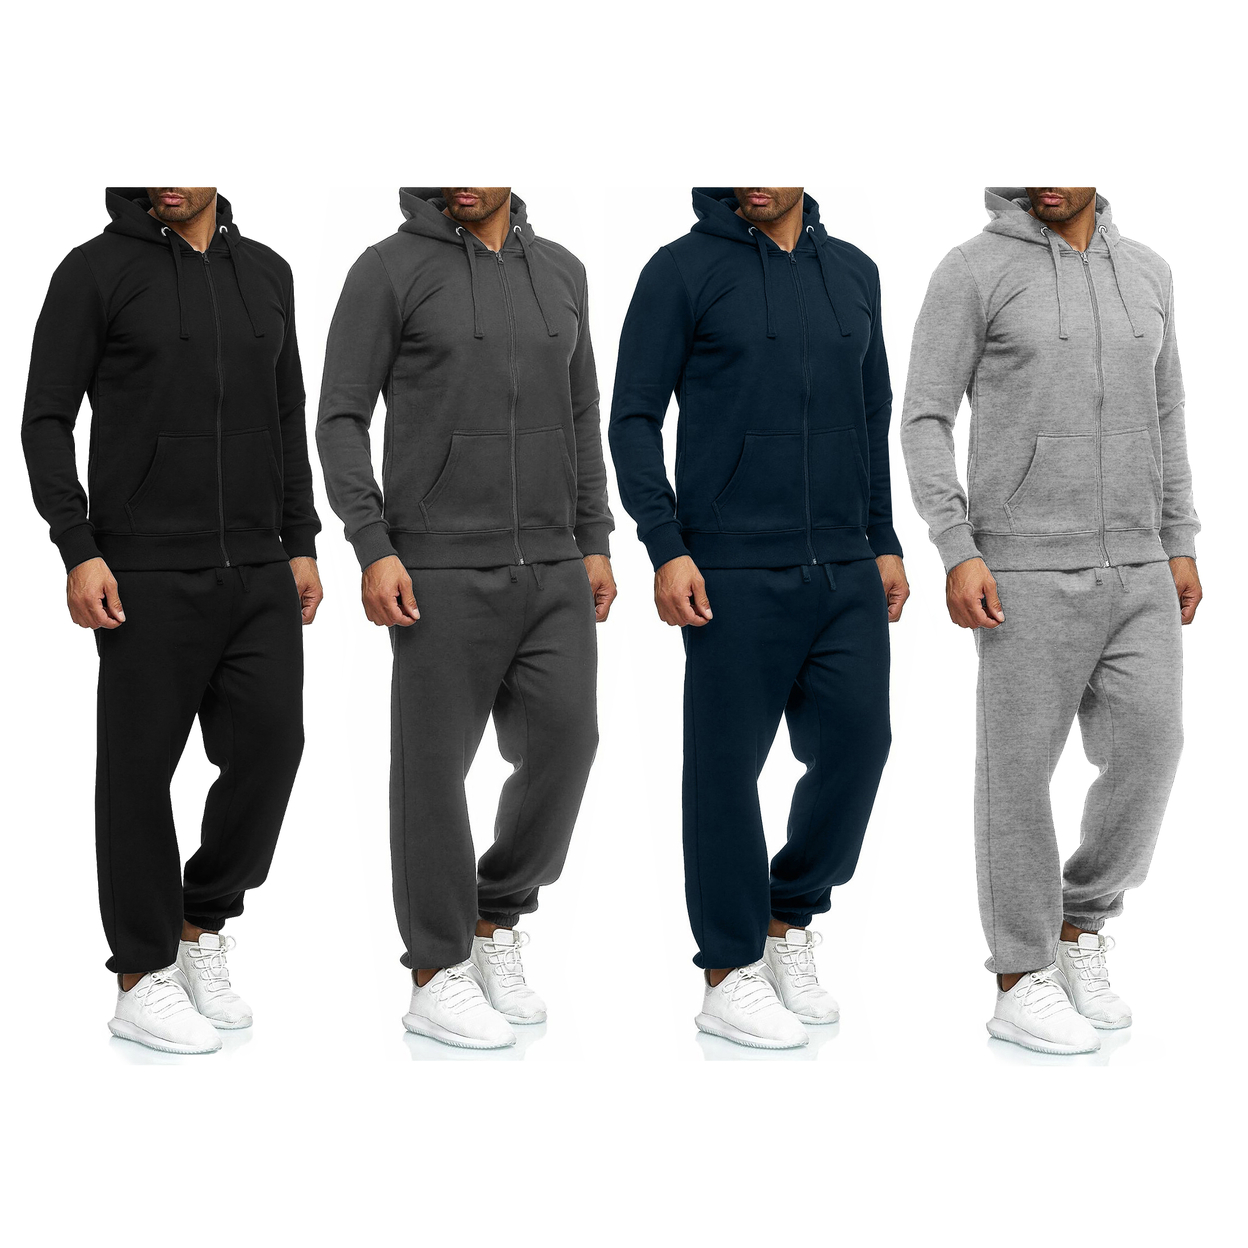 Multi-Pack: Men's Casual Big & Tall Athletic Active Winter Warm Fleece Lined Full Zip Tracksuit Jogger Set - Black, 1-pack, 3xl